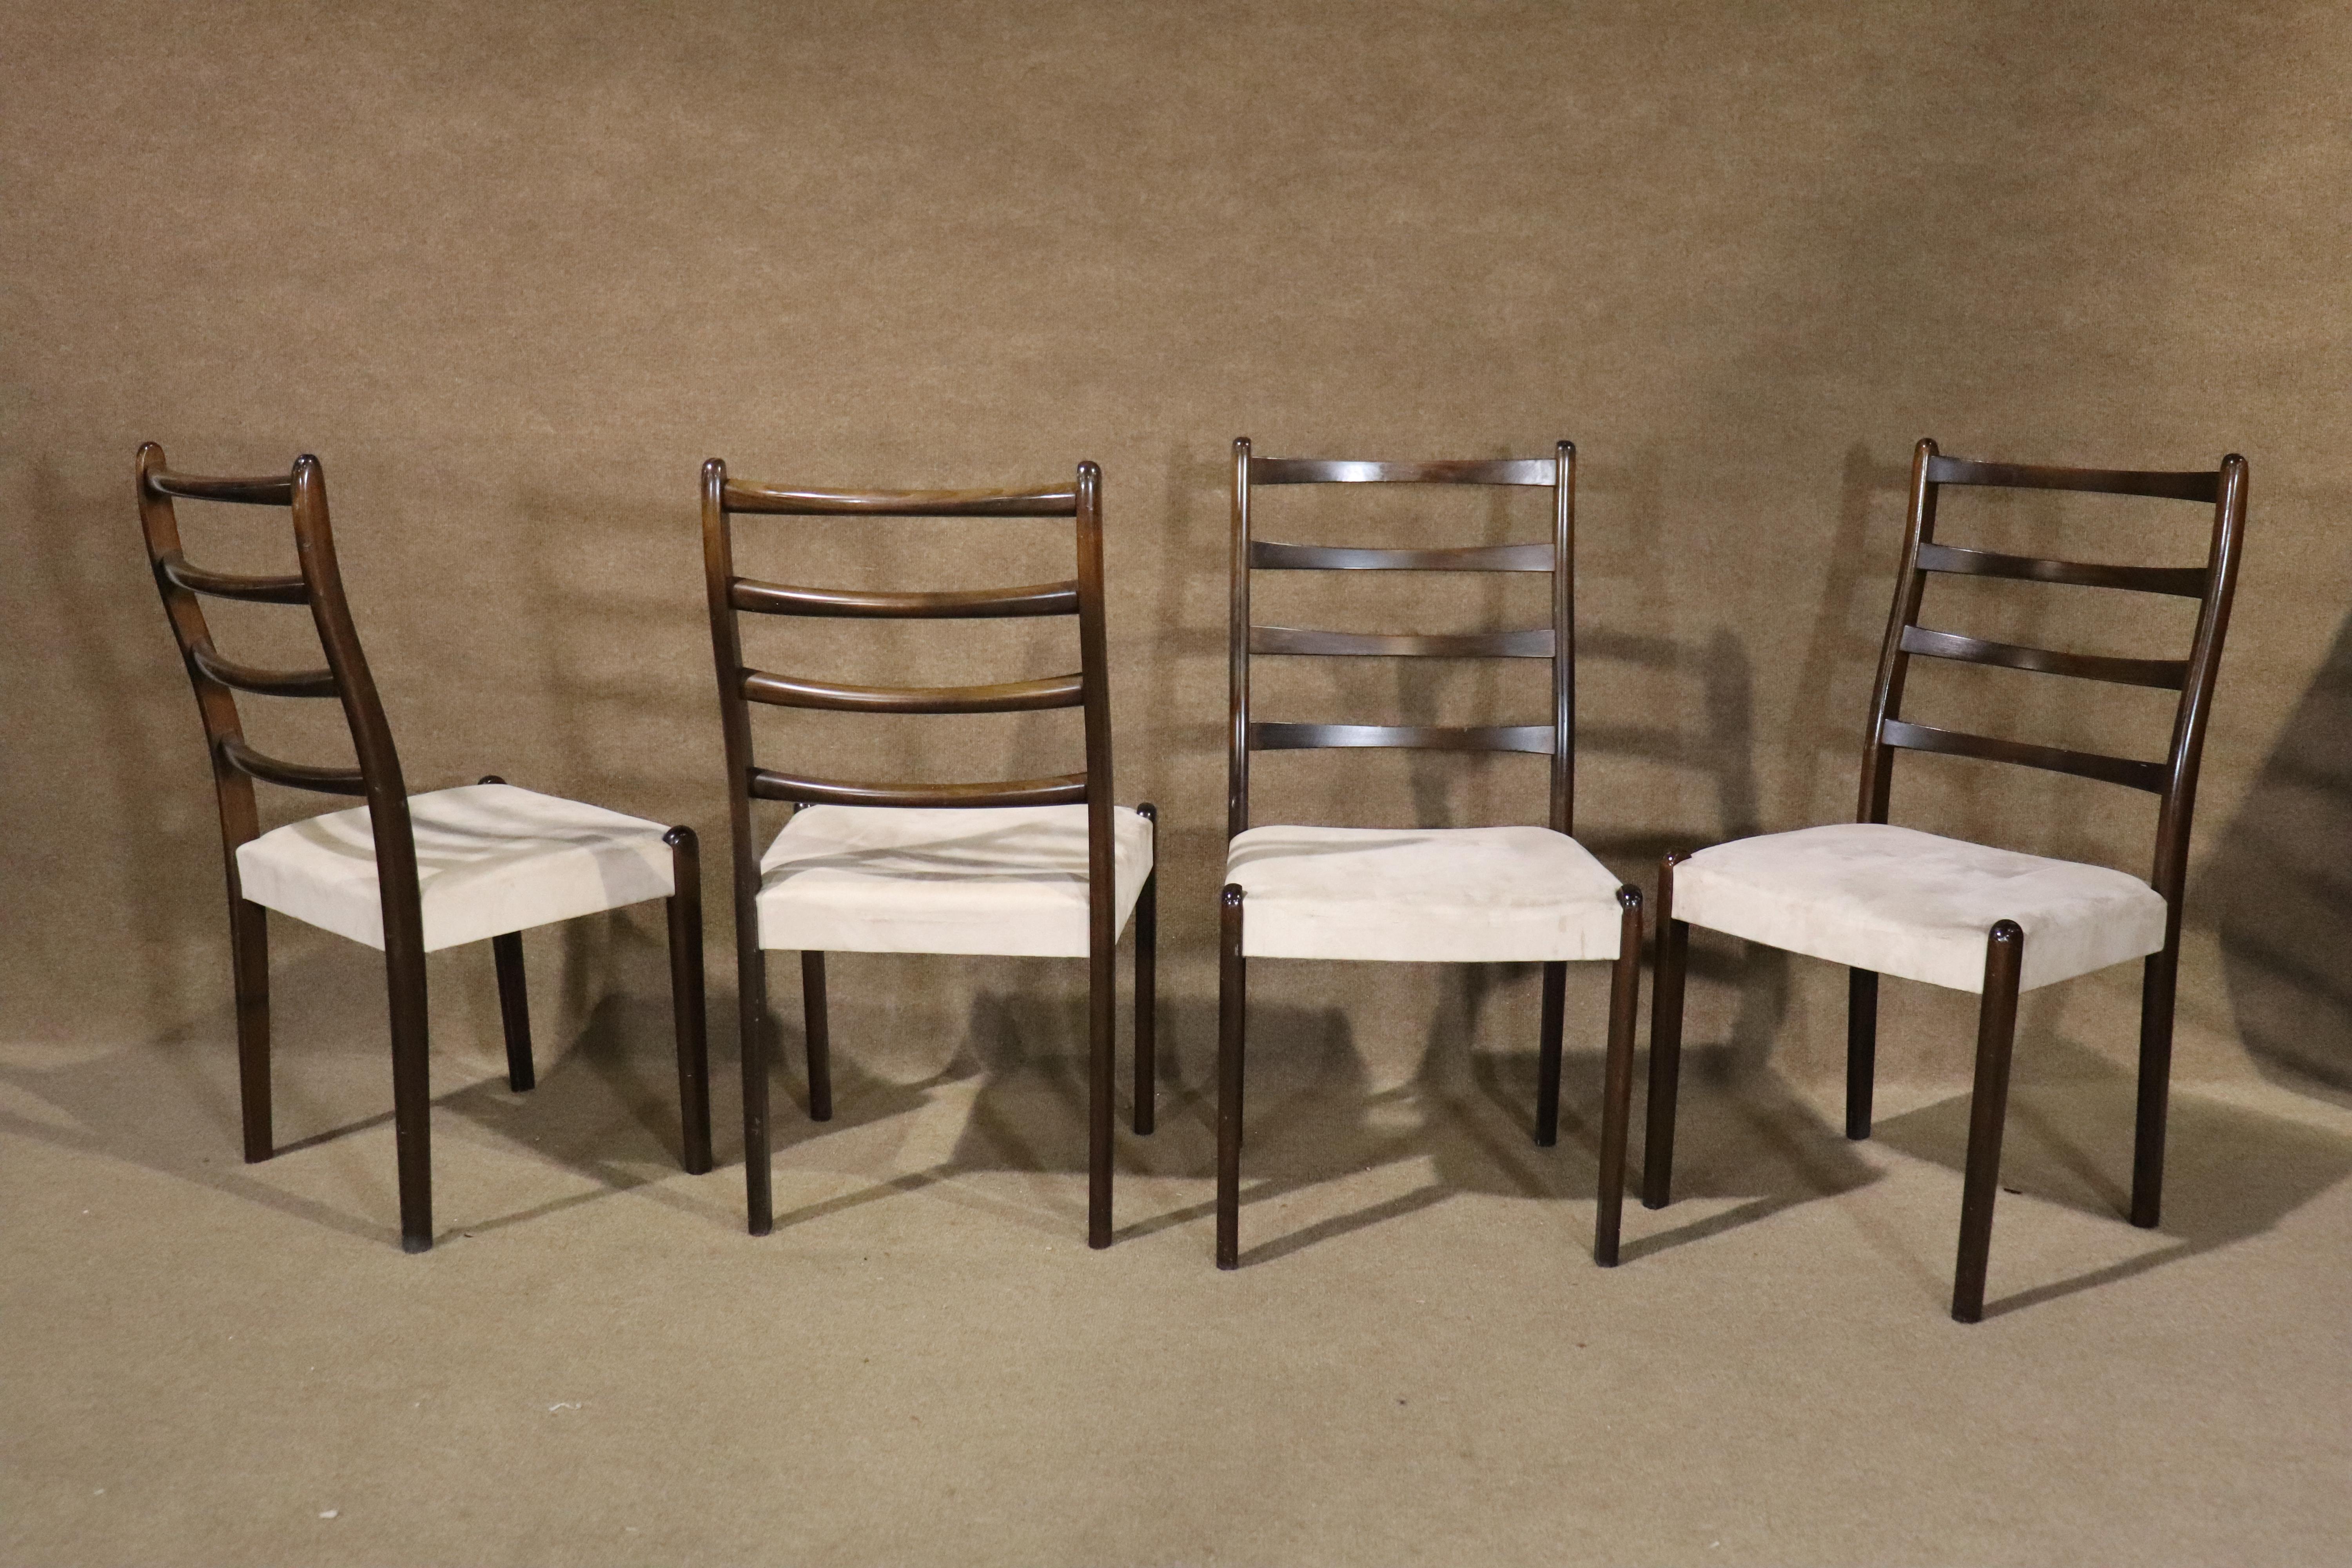 Set of six mid-century modern dining chairs with sculpted ladder backs. Great form for comfort with thick cushioned seats.
Please confirm location NY or NJ